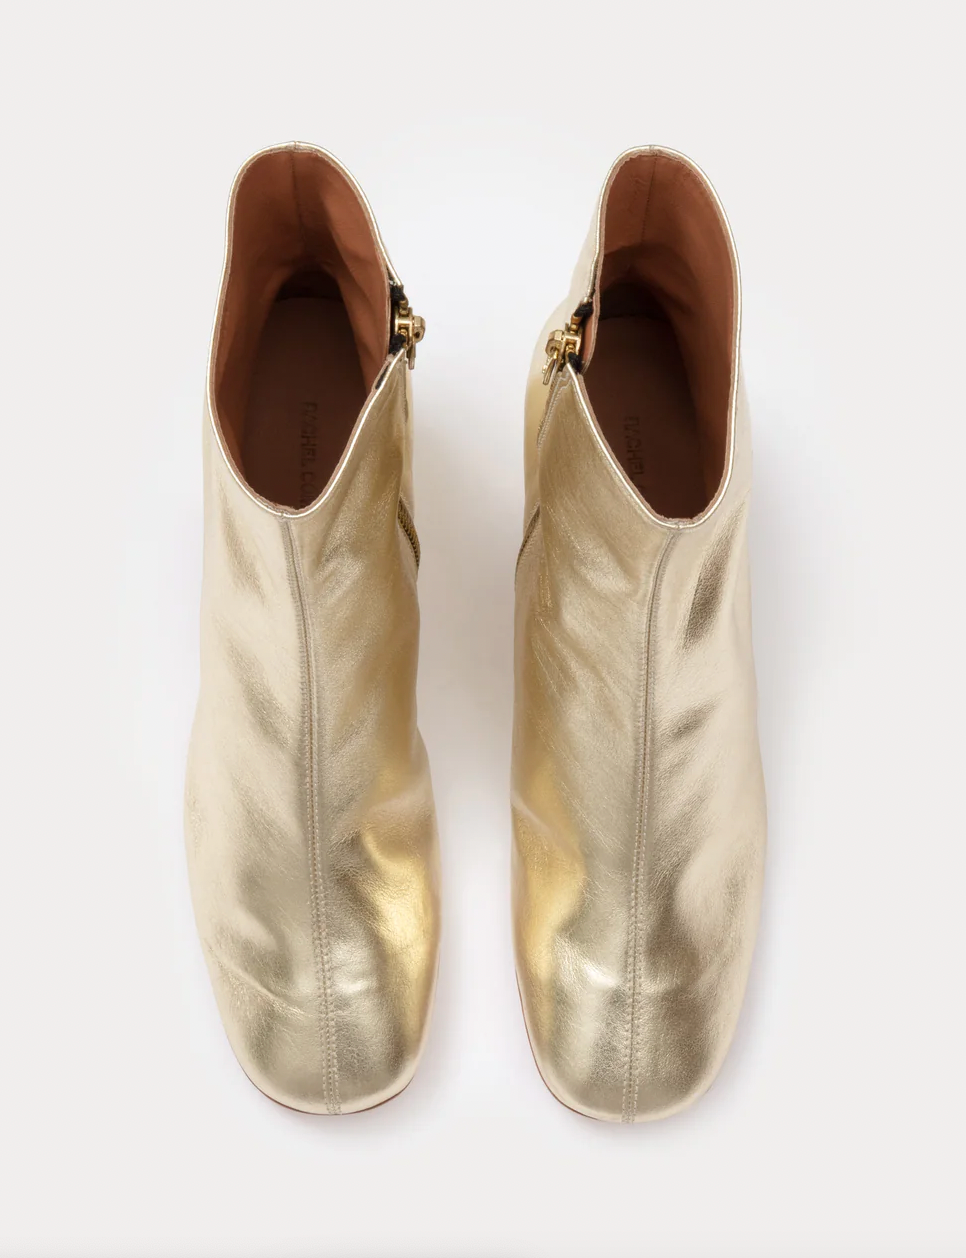 Product Image for Sugar Beet Bootie, Gold